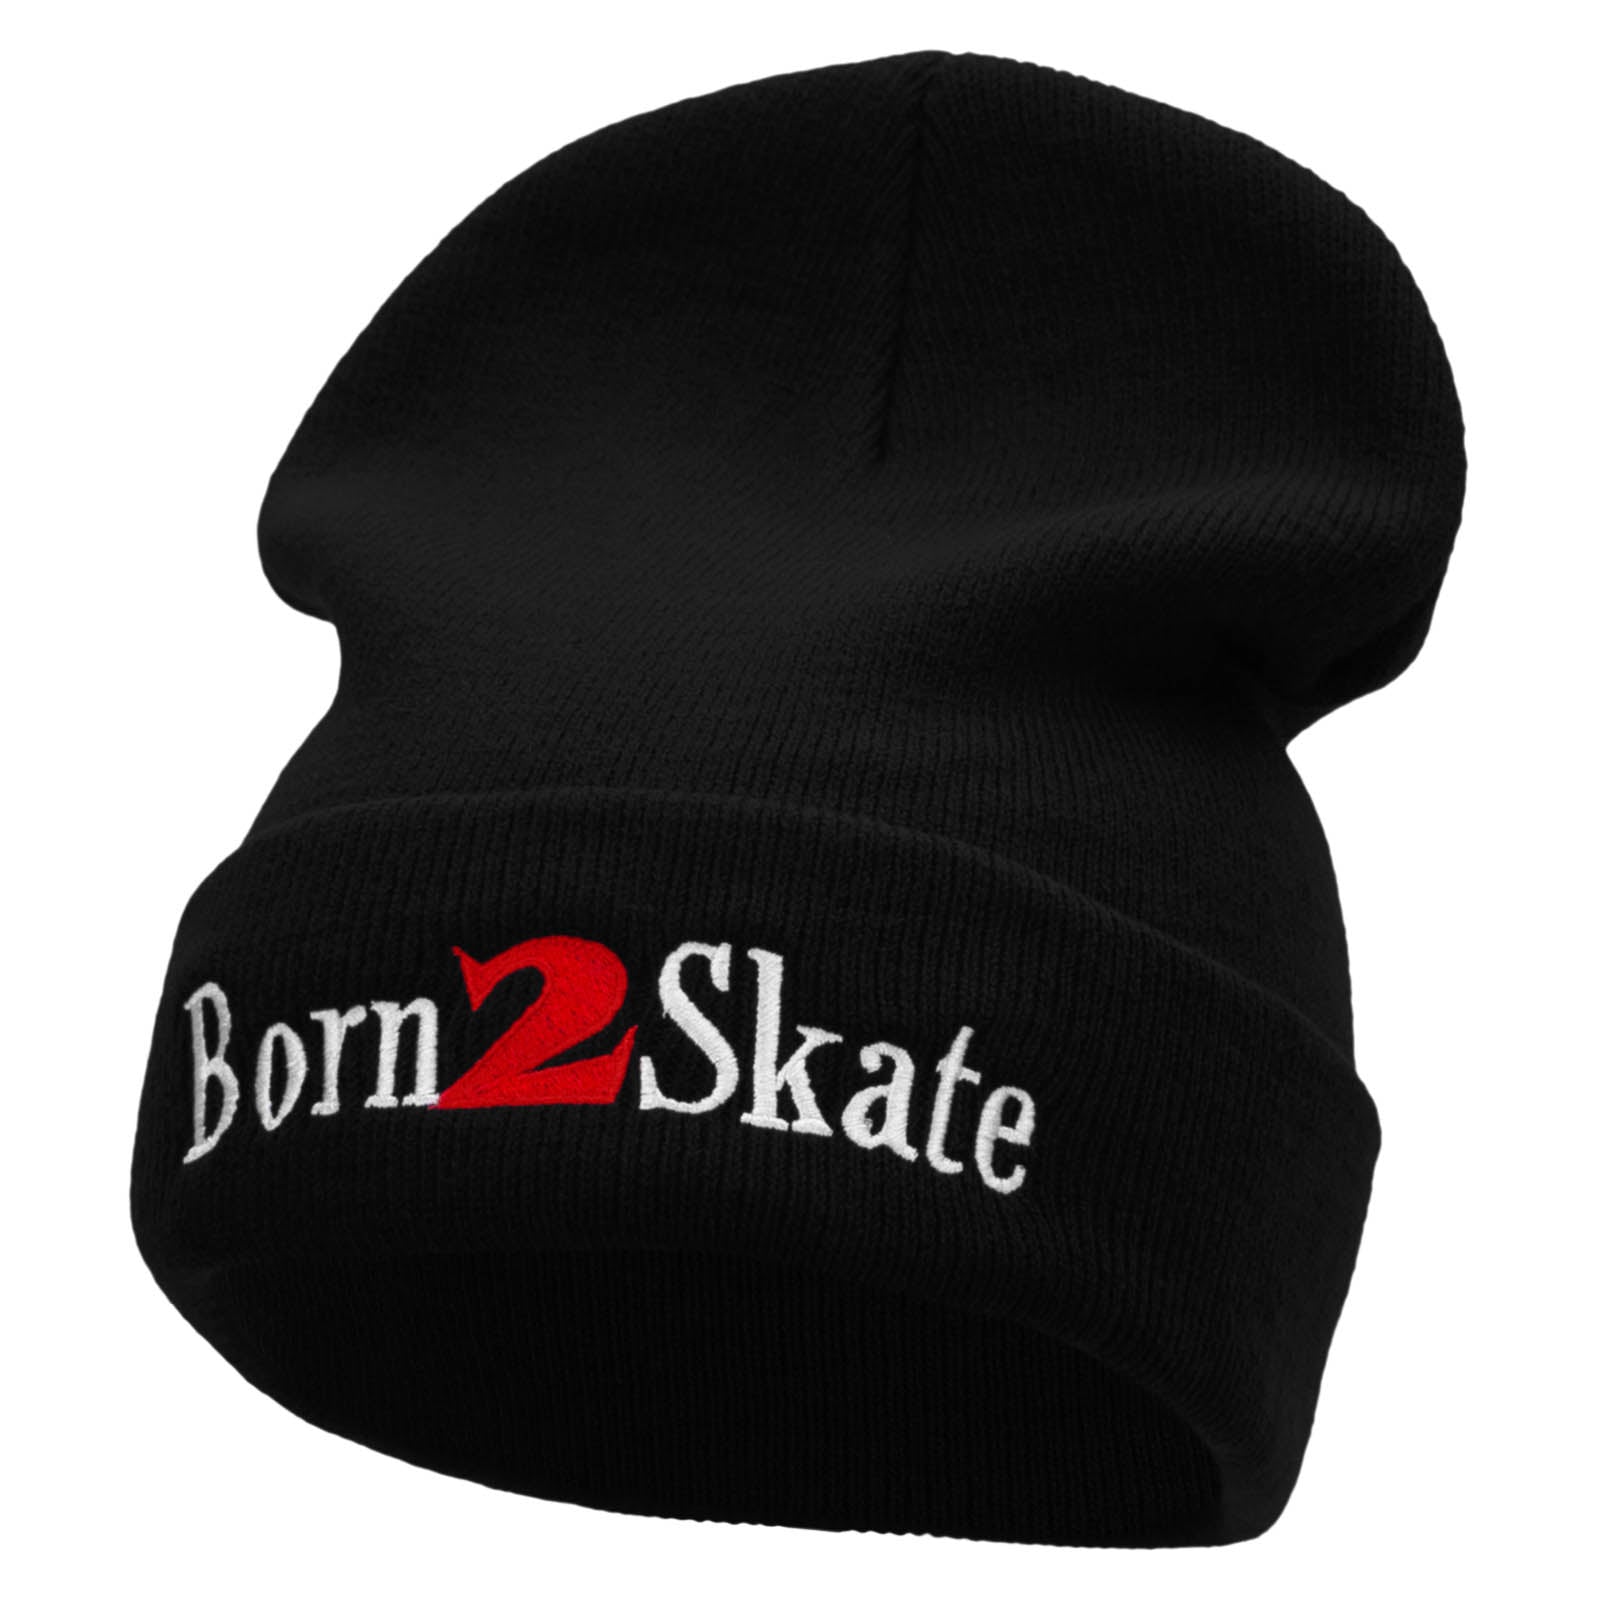 Born 2 Skate Embroidered 12 Inch Long Knitted Beanie - Black OSFM